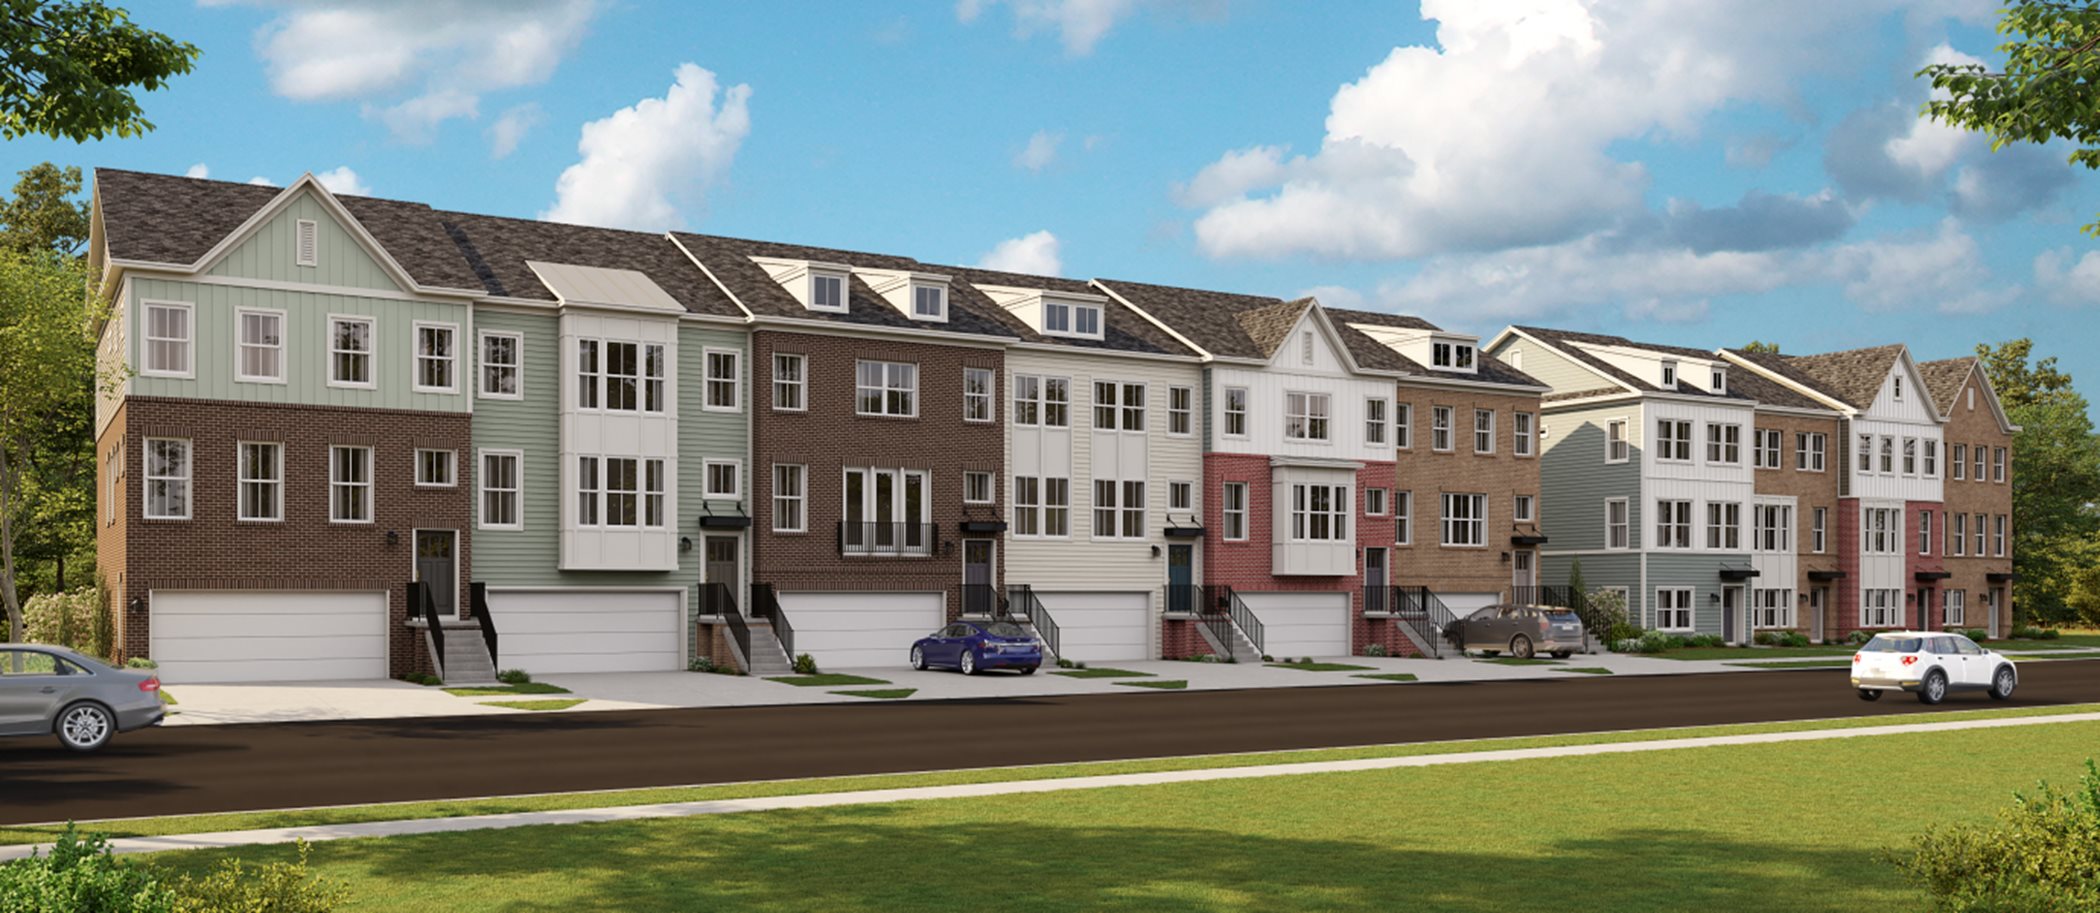 streetscape of townhomes